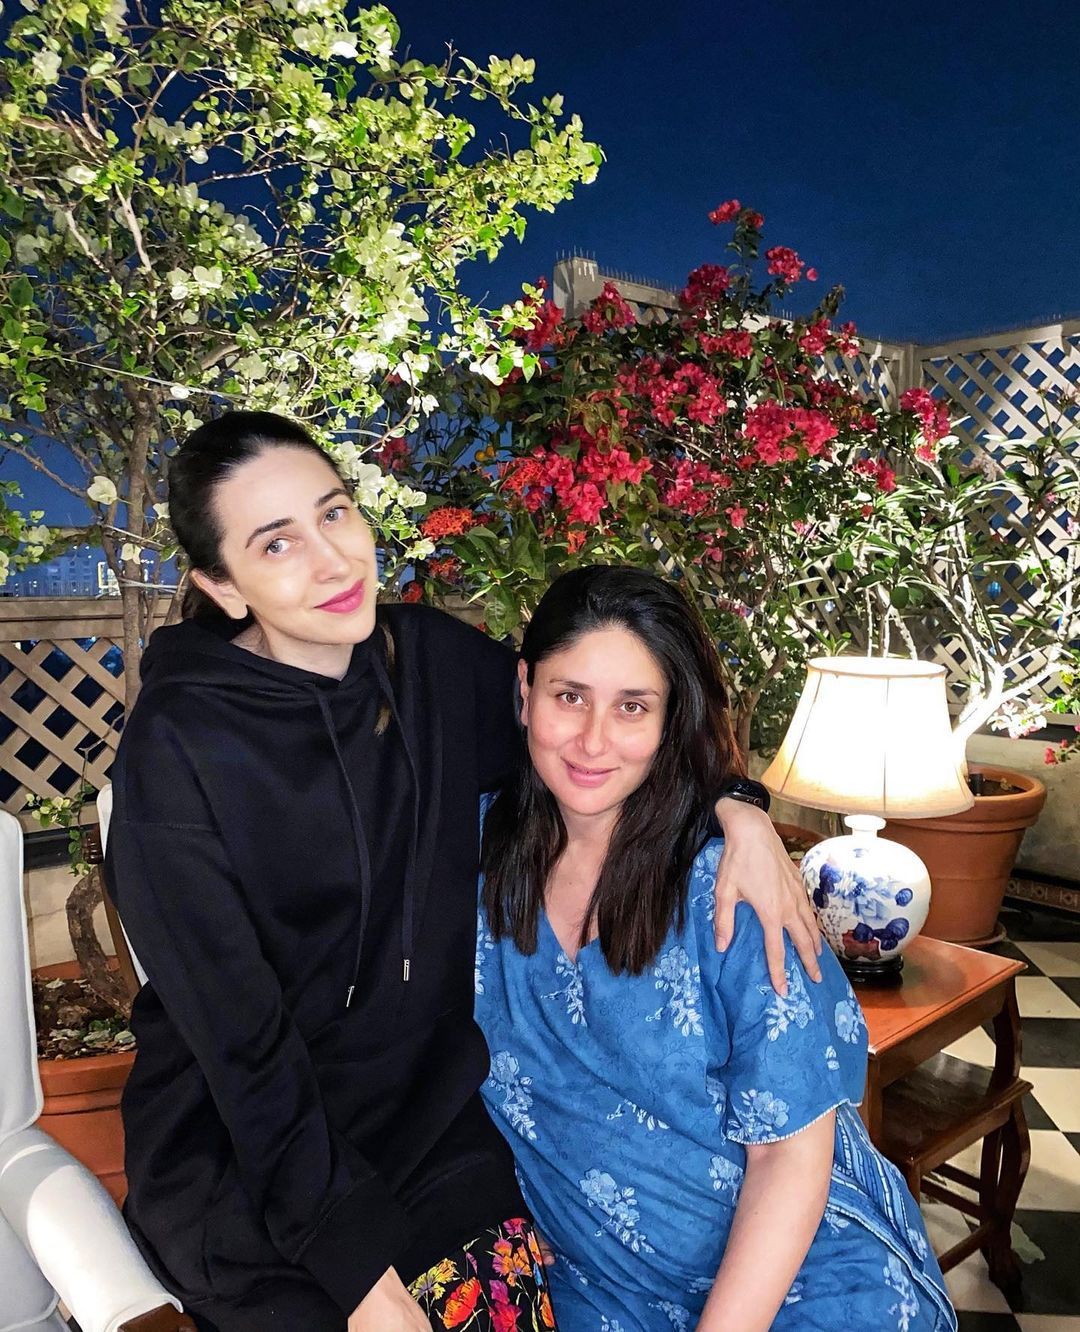 Kareena Kapoor Celebrates 'New Beginnings' And Gives Us A Sneak Peek Into Her New Home, Sister Karisma Kapoor Joins Her